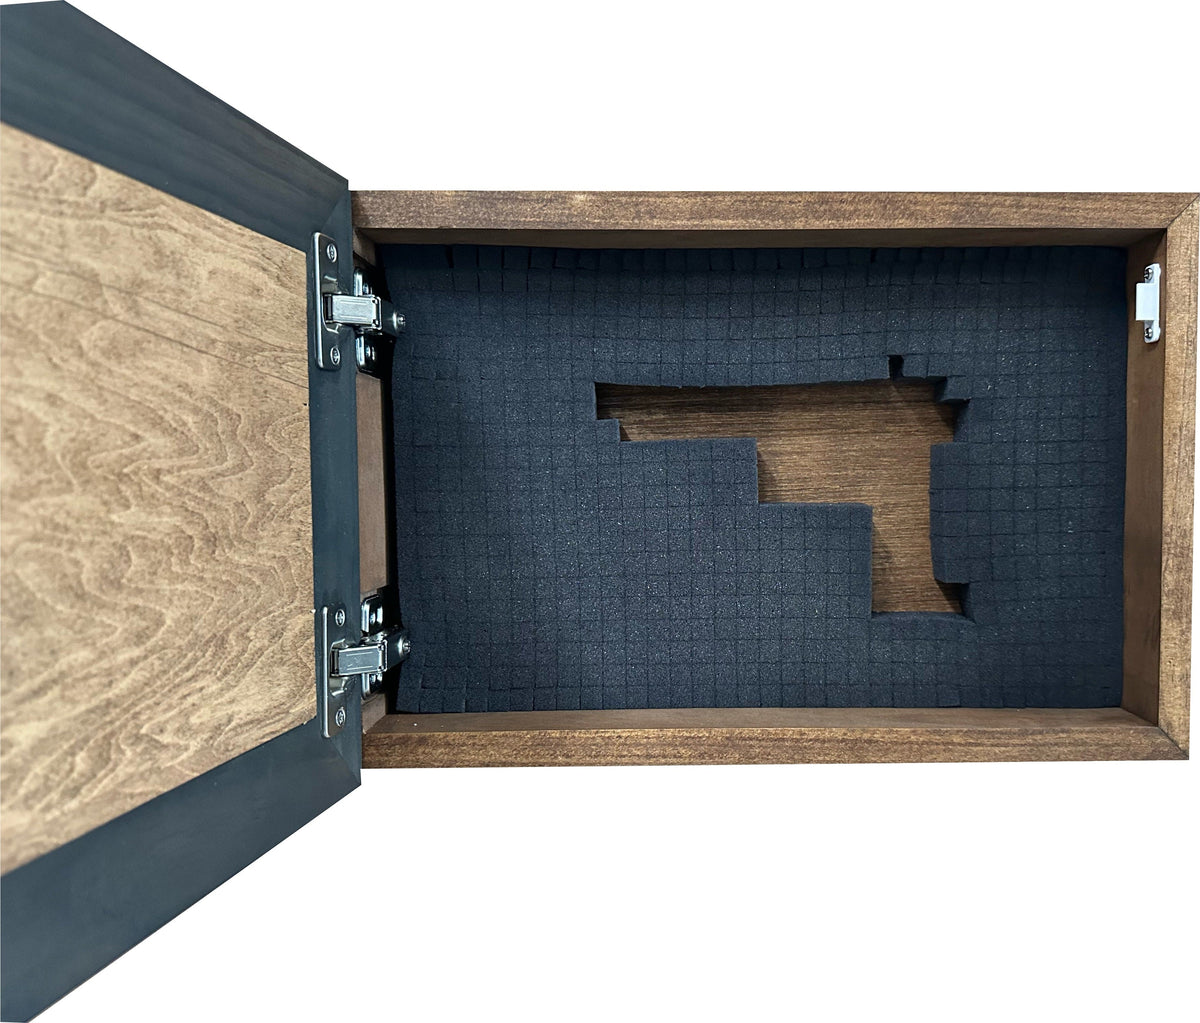 Hidden Gun Storage Cabinet - I'd Rather Be Fishing Armadillo Safe and Vault